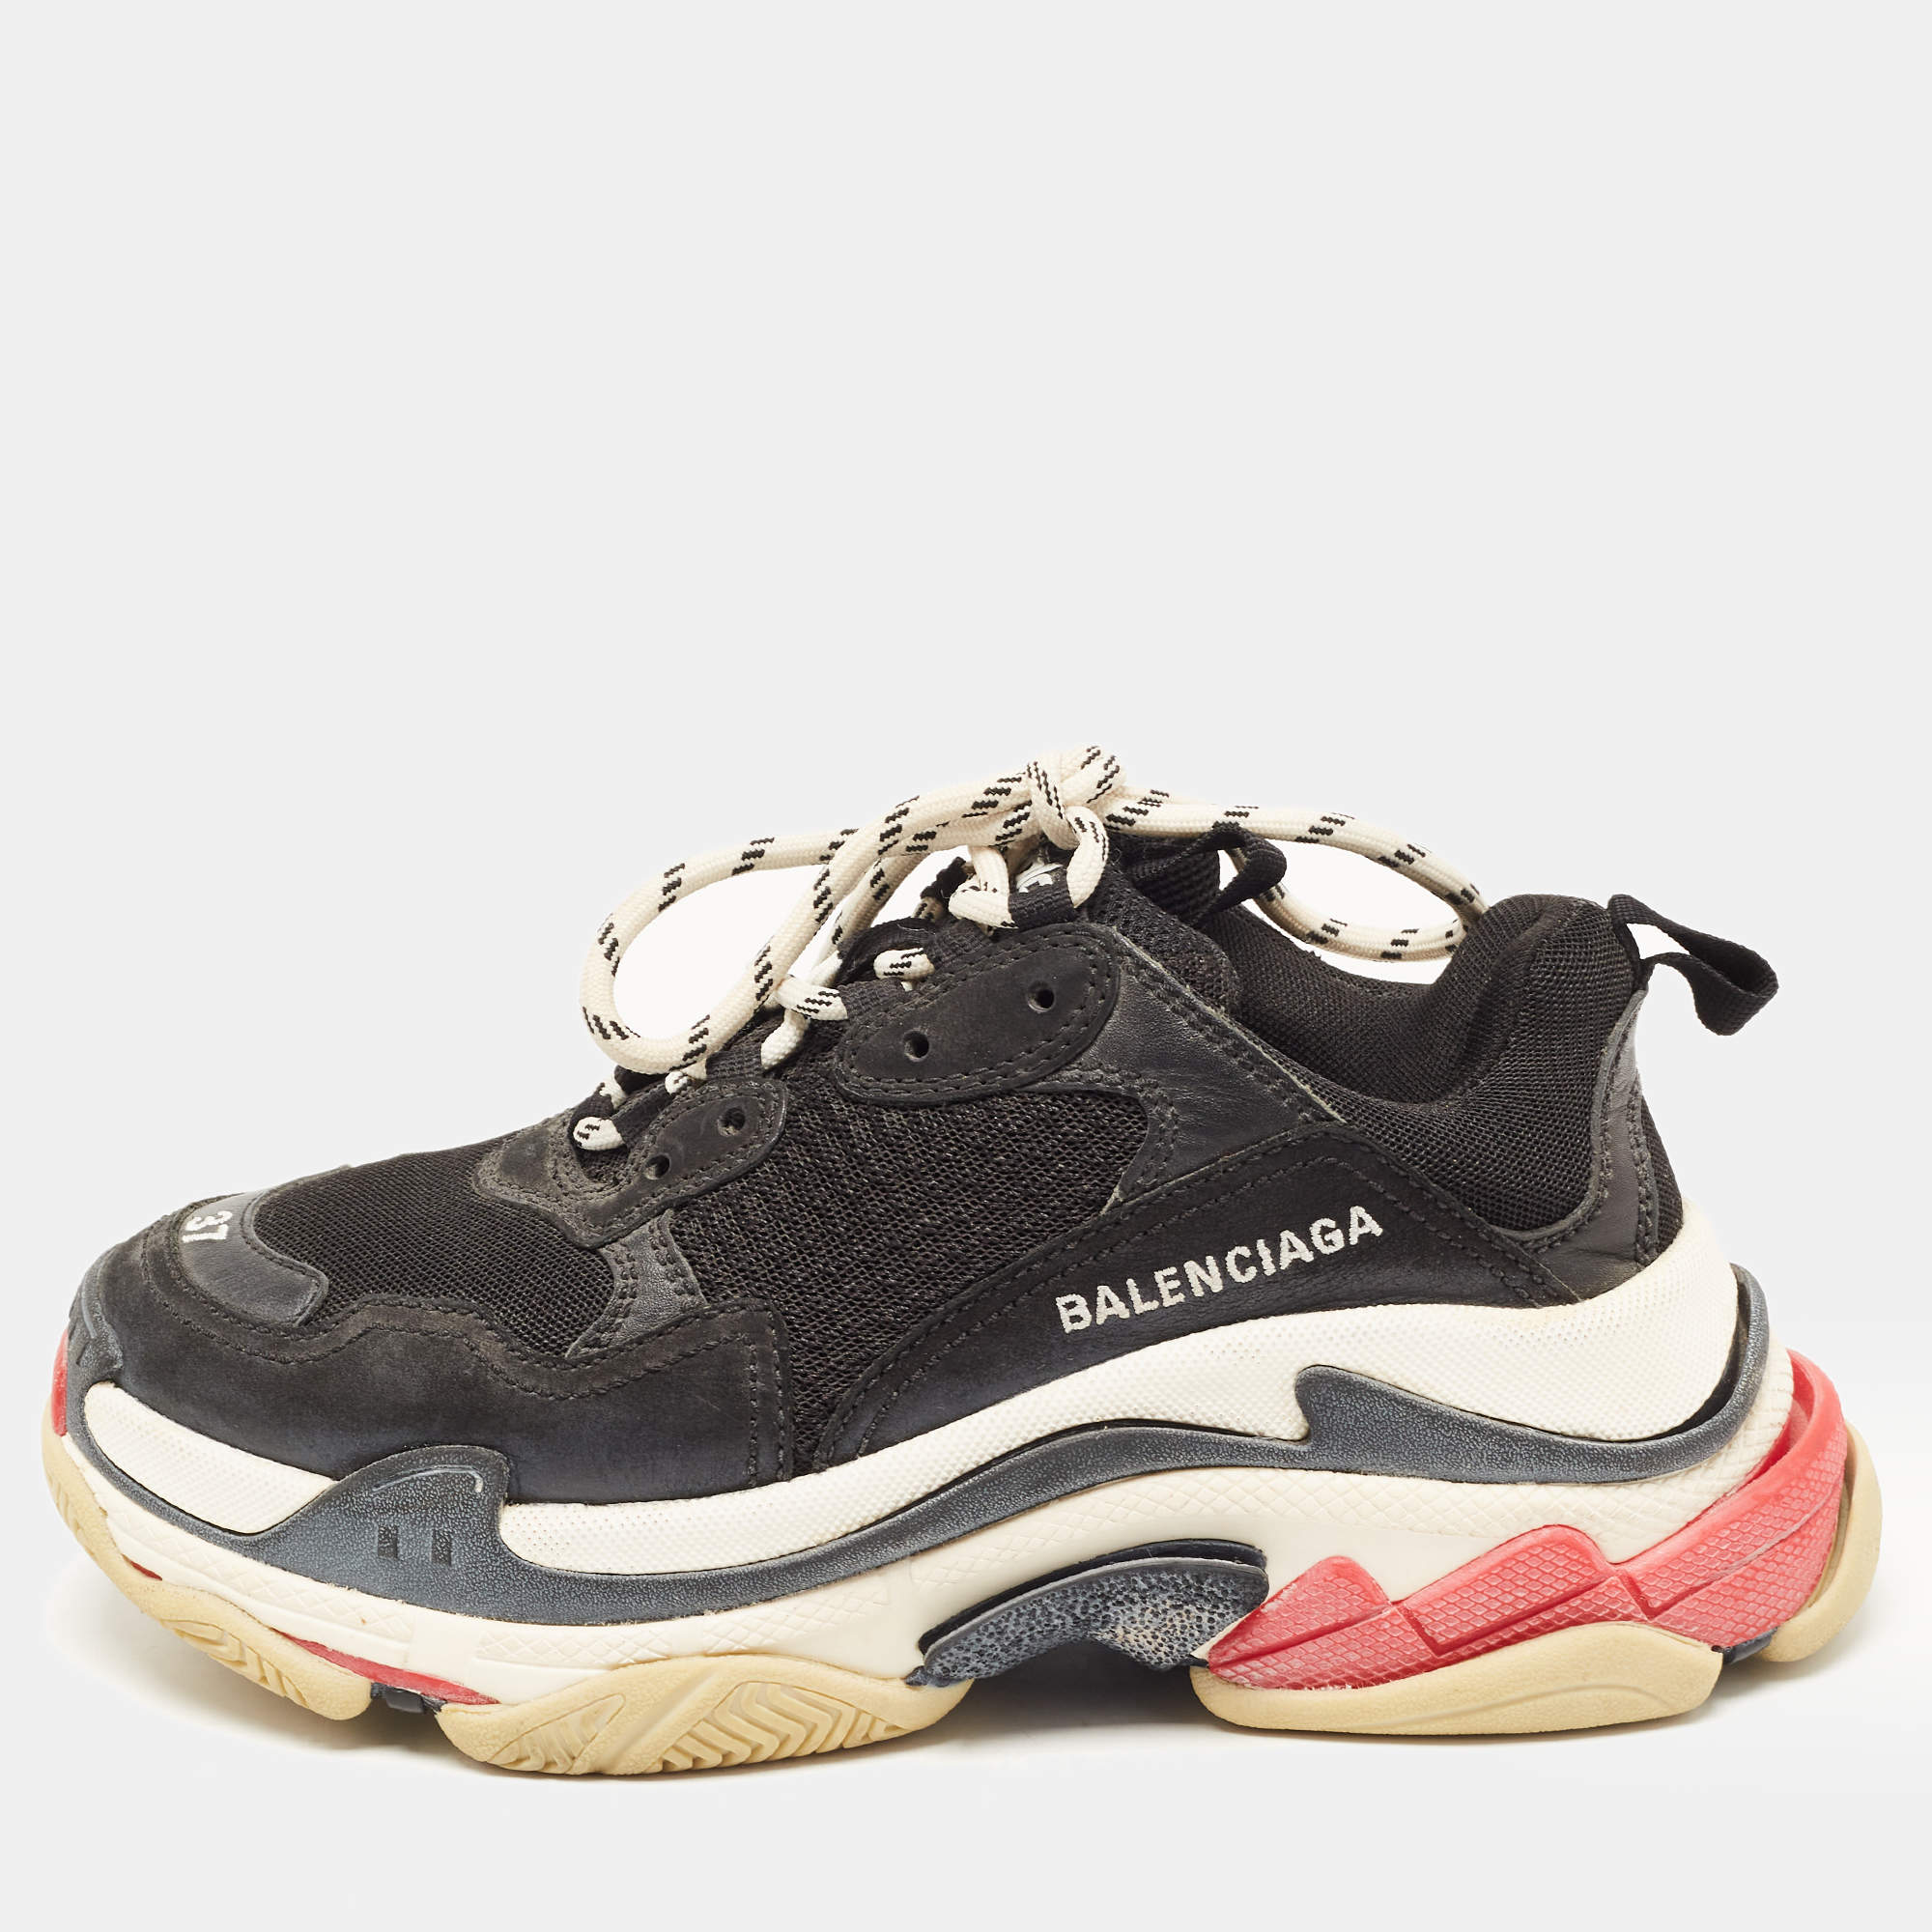 Balenciaga Black Leather and Mesh Triple S Sneakers Size 37